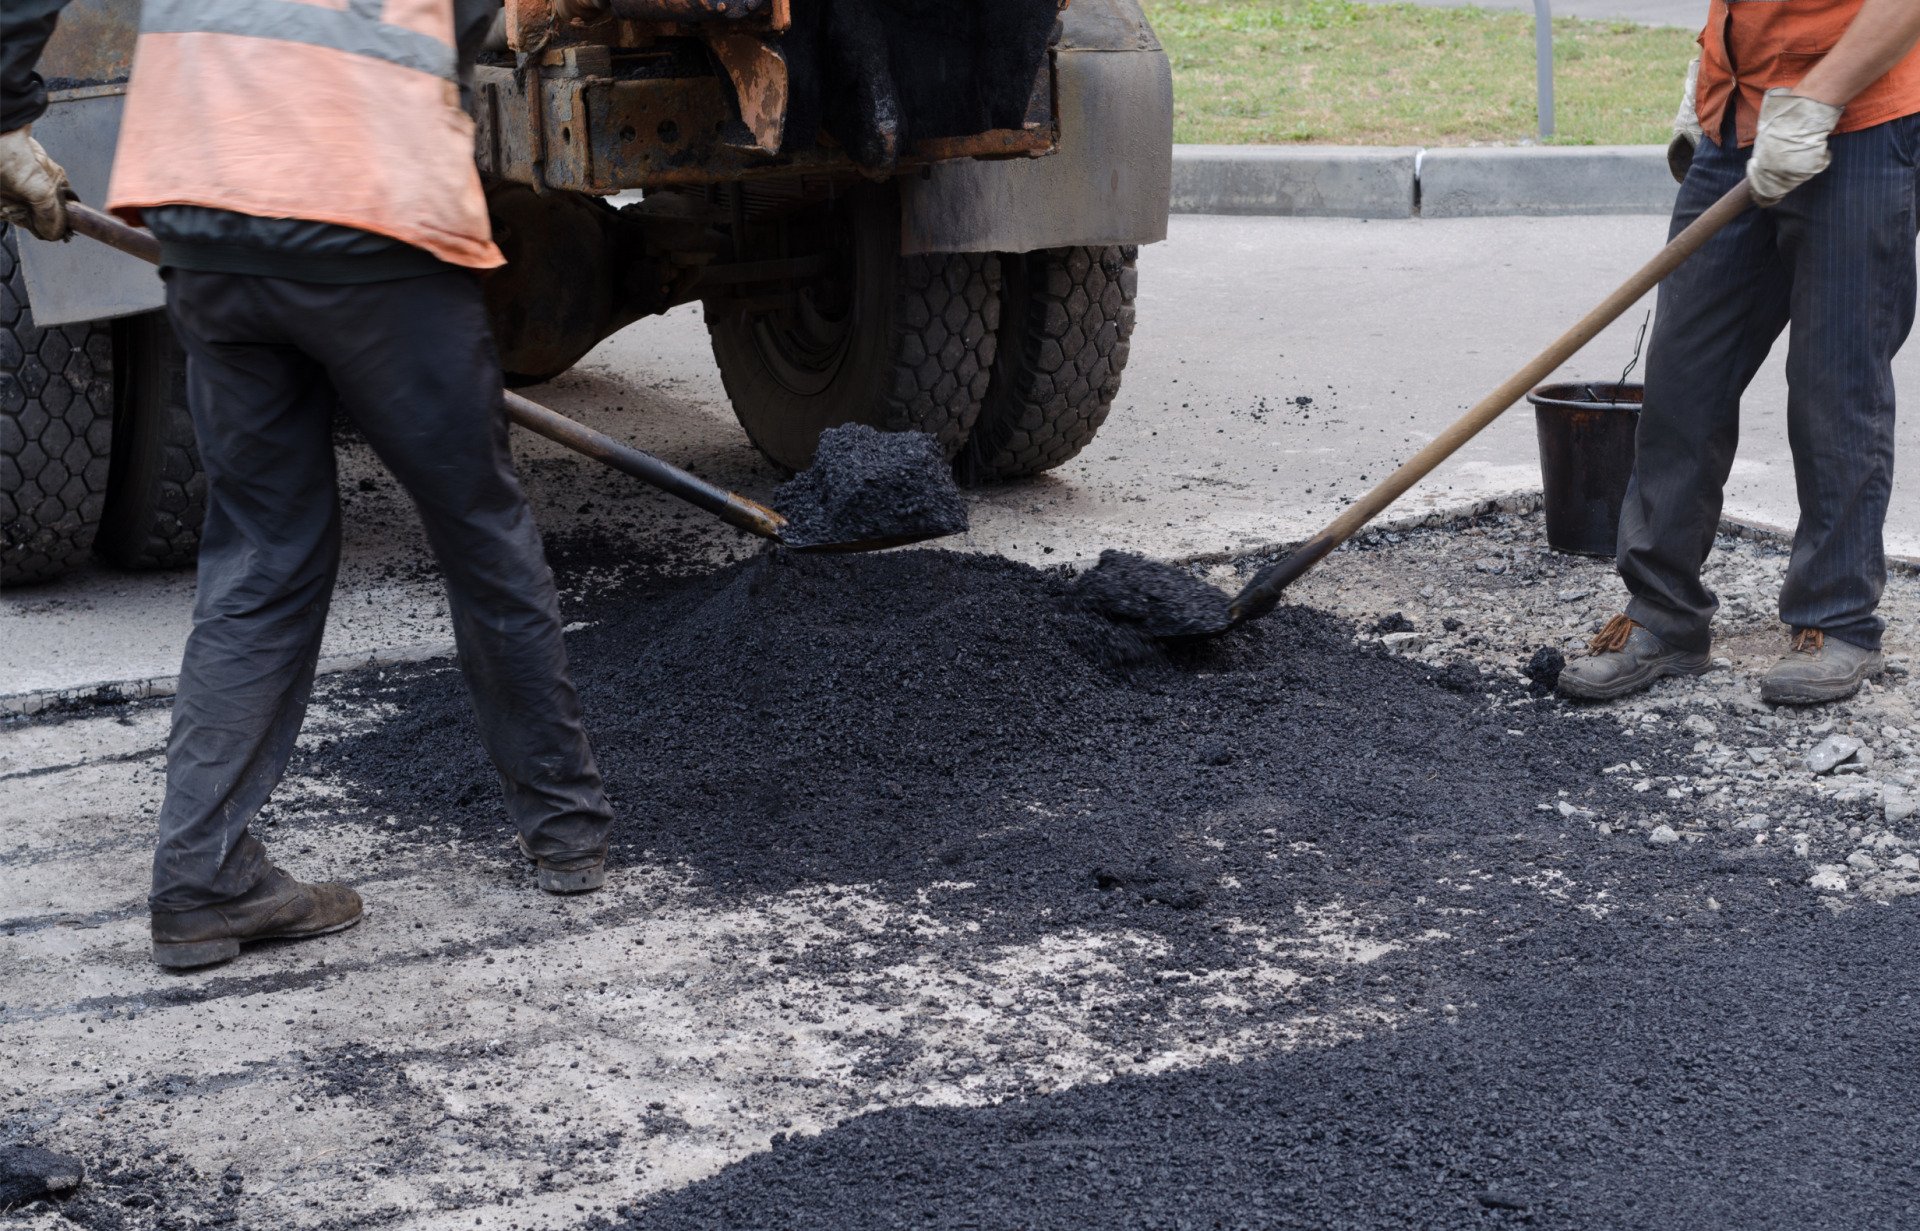 To prevent further damage and reduce long-term repair costs, the parking lot repair contractors are filling the pothole.